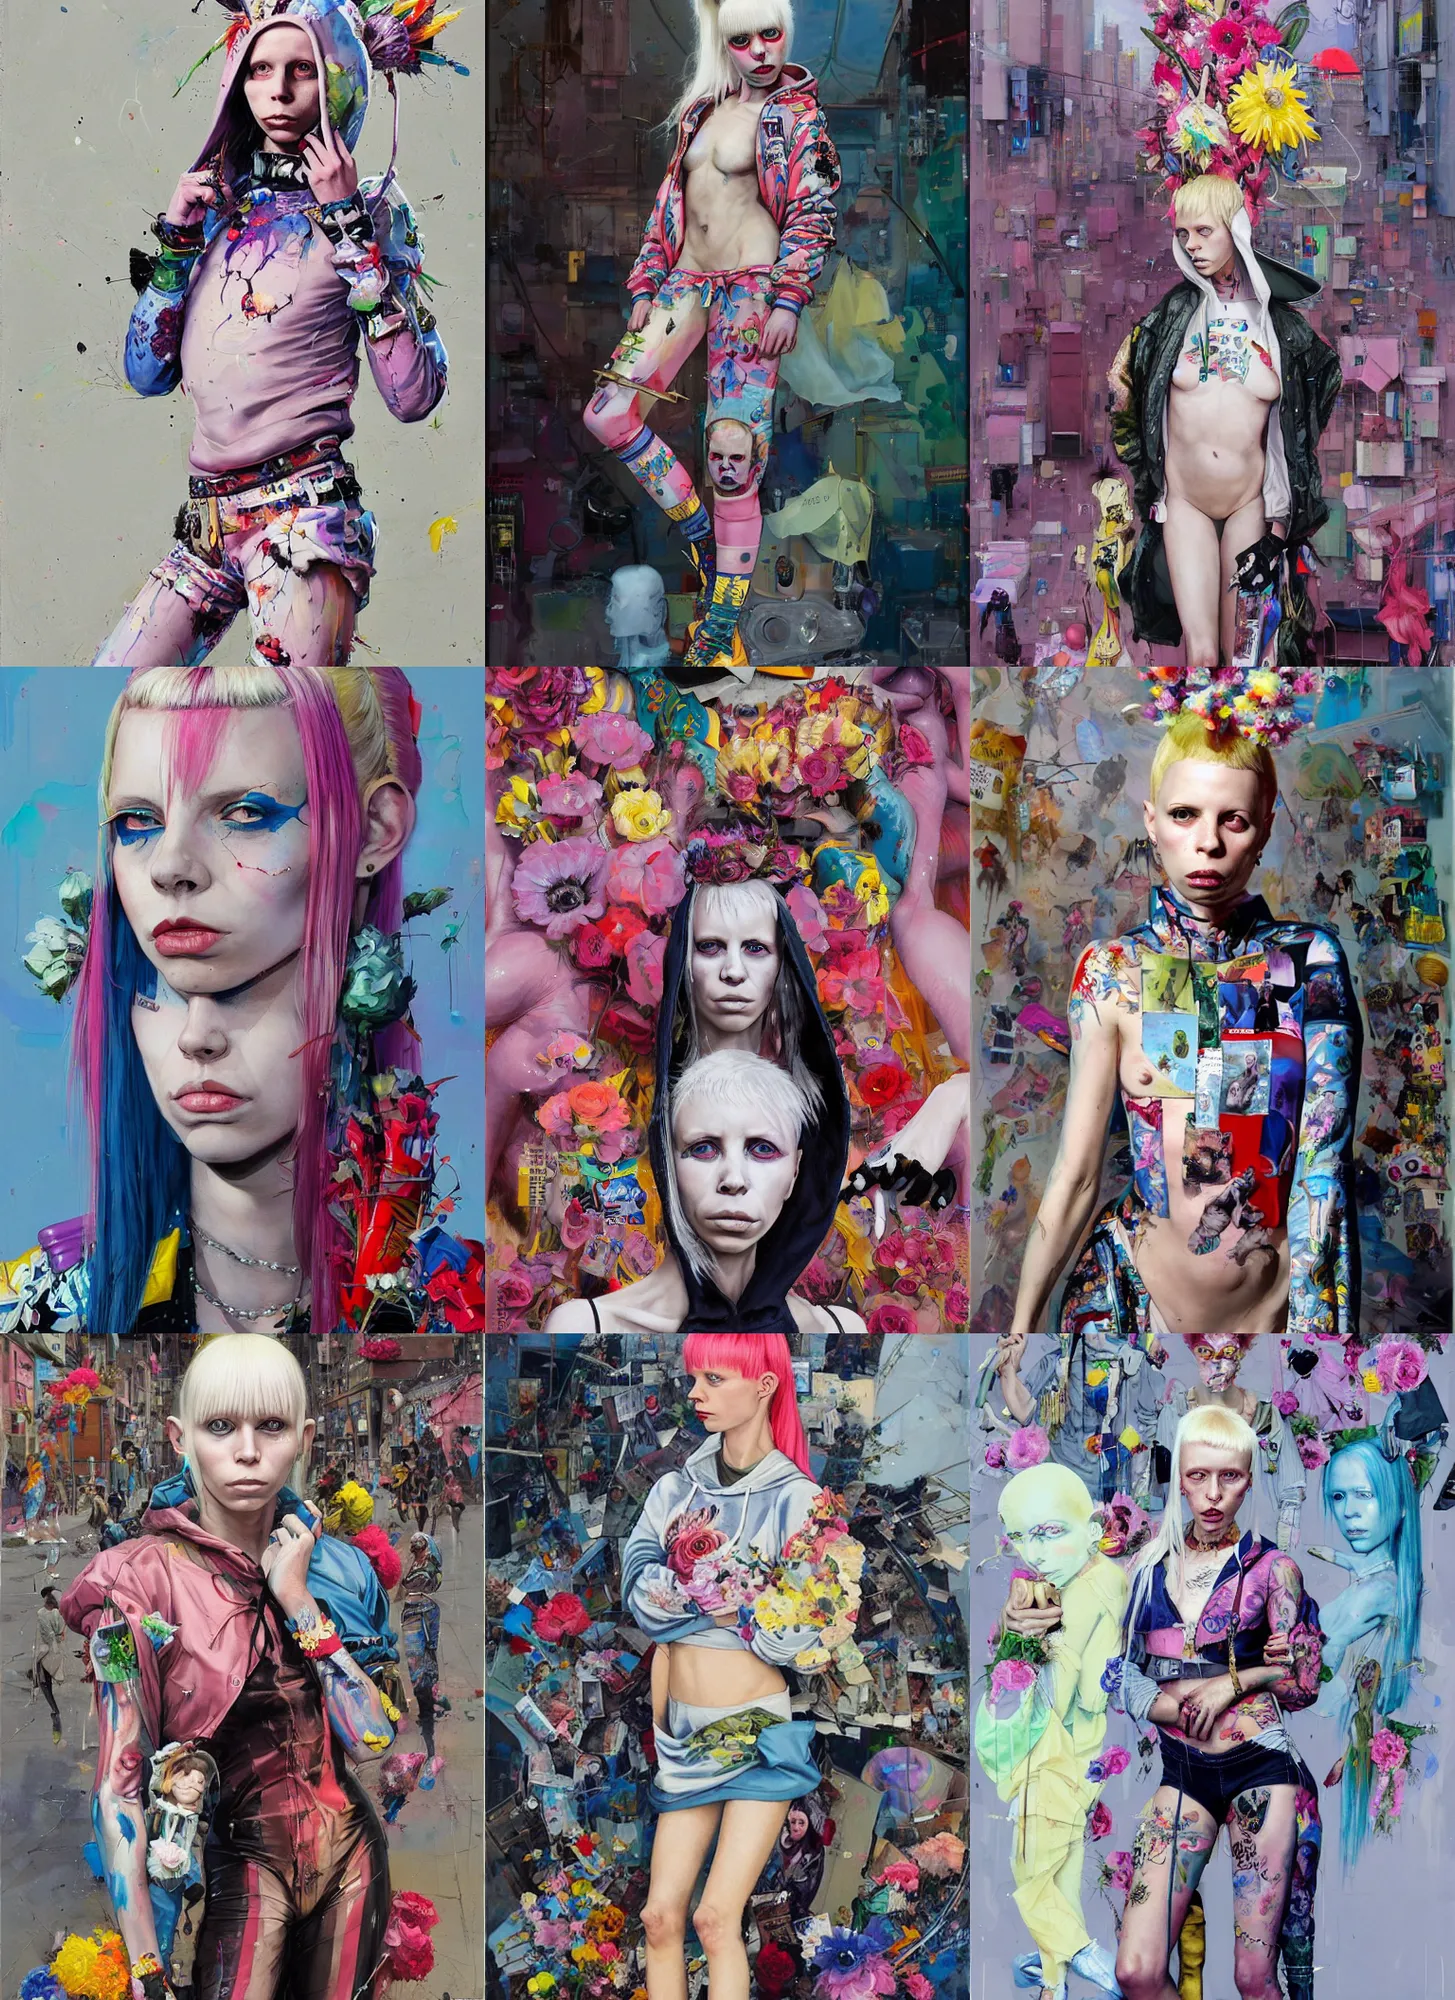 Prompt: 2 1 year old yolandi visser in style of martine johanna and donato giancola, wearing a hoodie, standing in township street, street fashion outfit,!! haute couture!!, full figure painting by john berkey, david choe, ismail inceoglu, decorative flowers, 2 4 mm, die antwoord music video